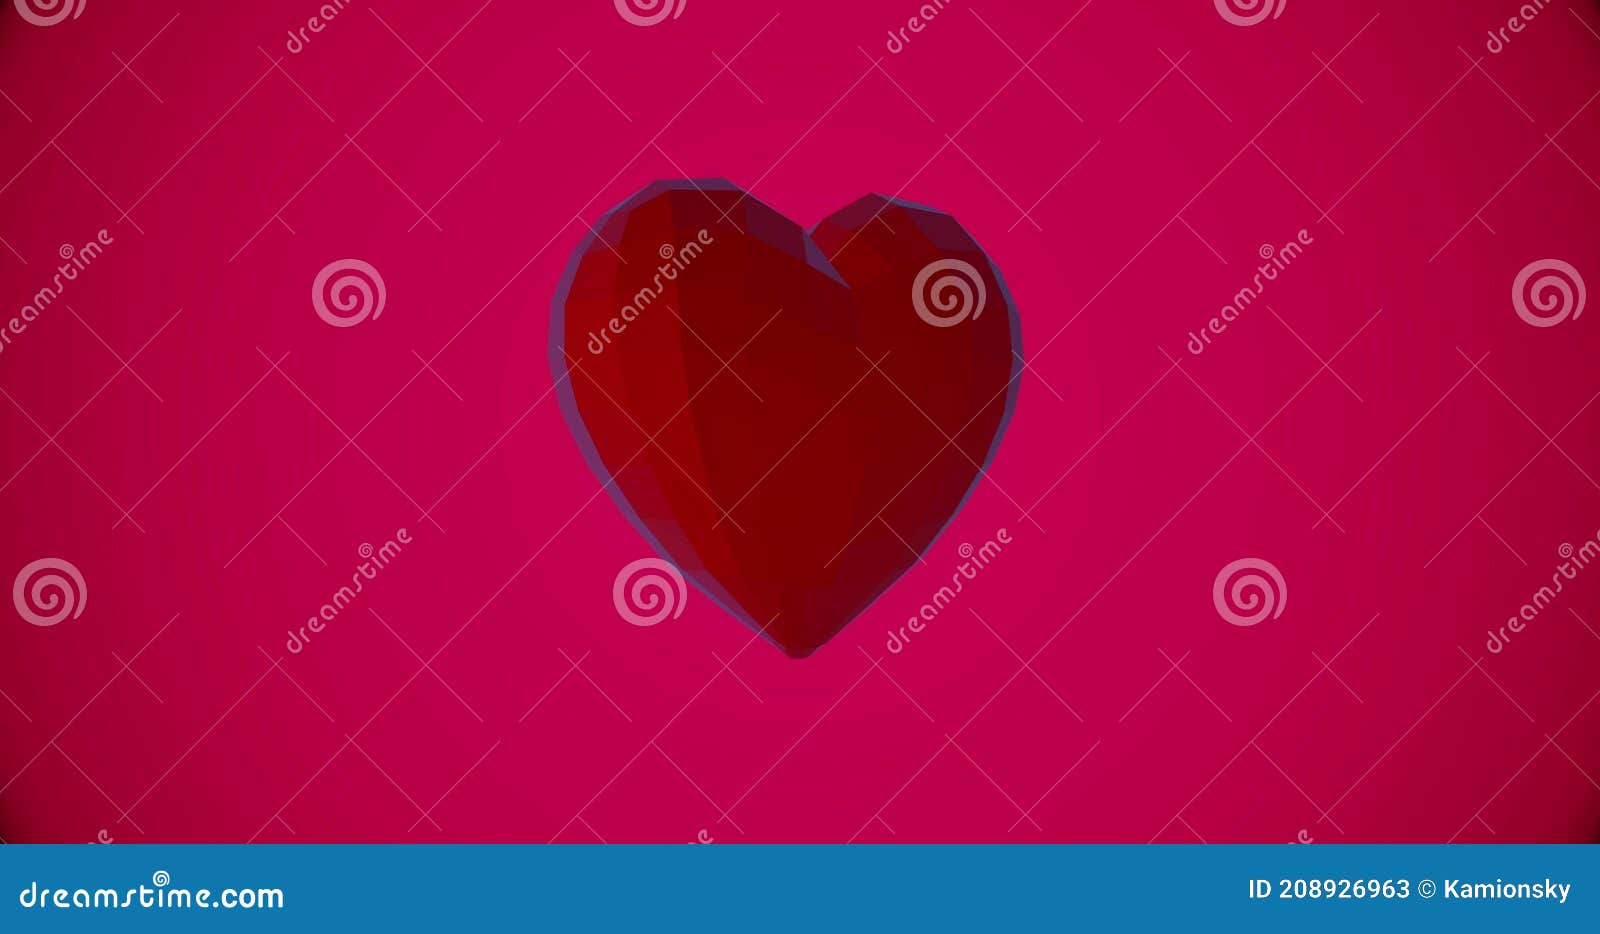 Romantic 3d Illustration For Valentine's Day Powerpoint Background For Free  Download - Slidesdocs